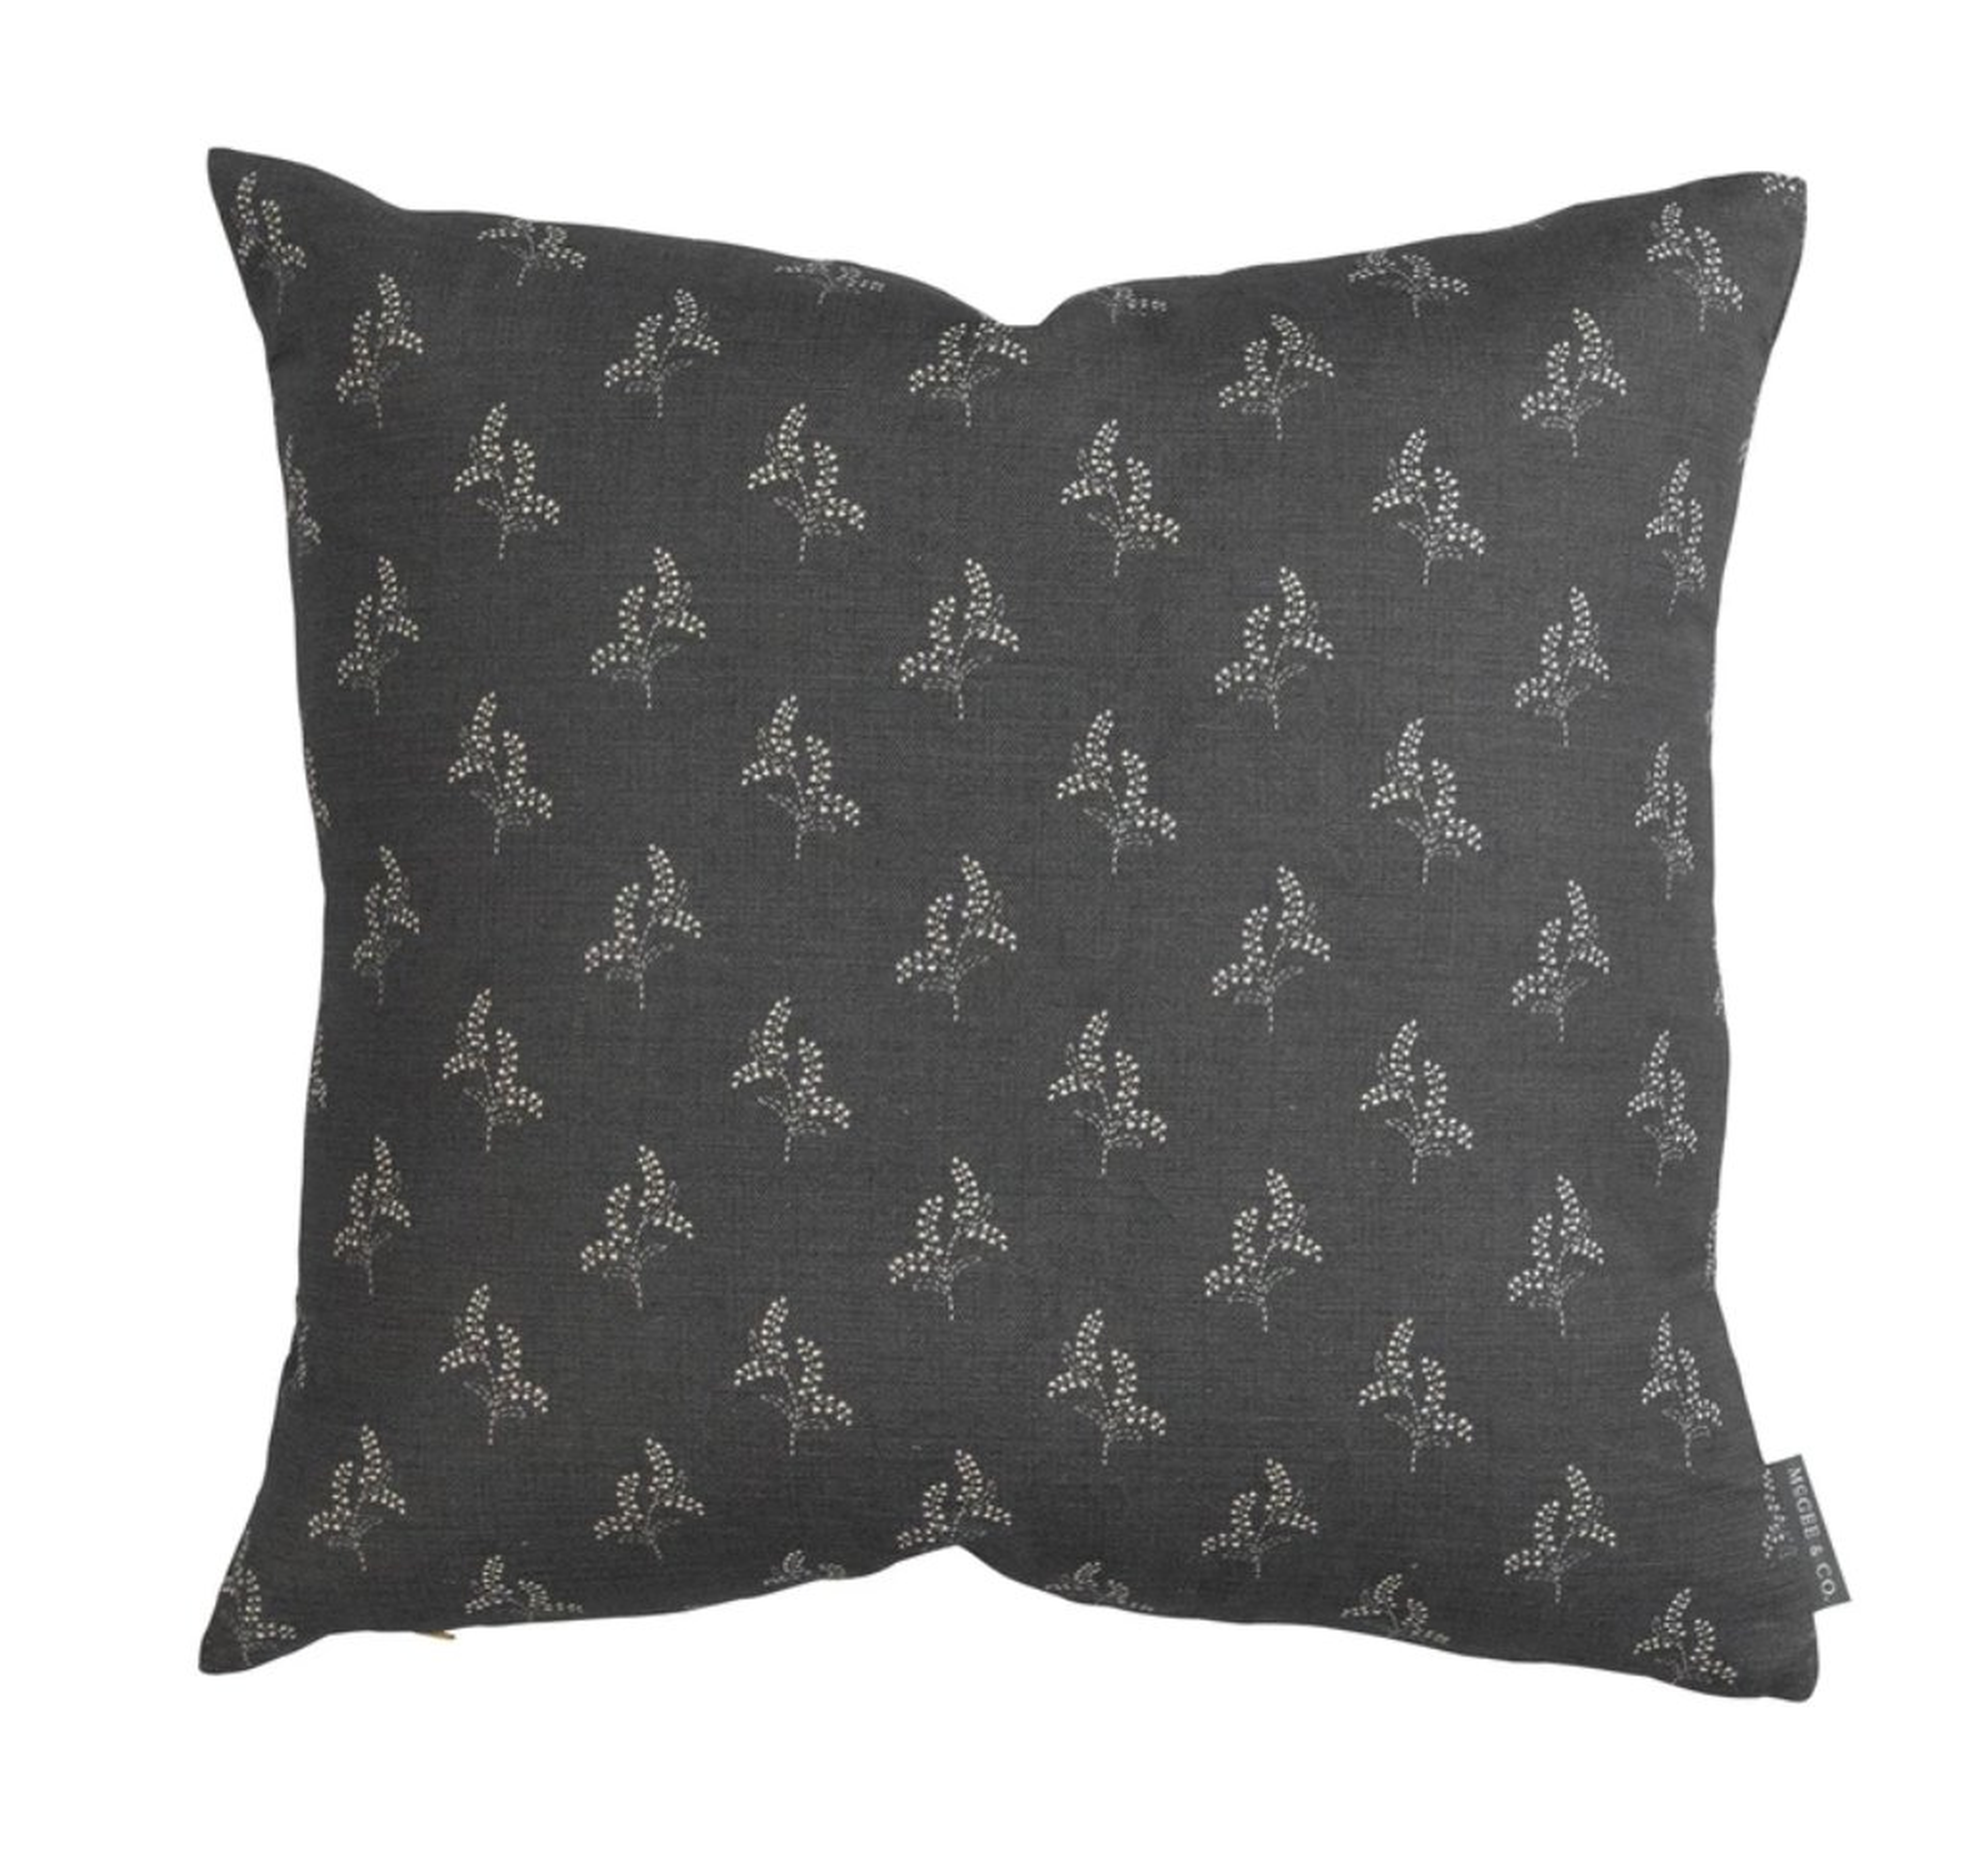 Gracie Block Print Pillow Cover, 20" x 20" - McGee & Co.